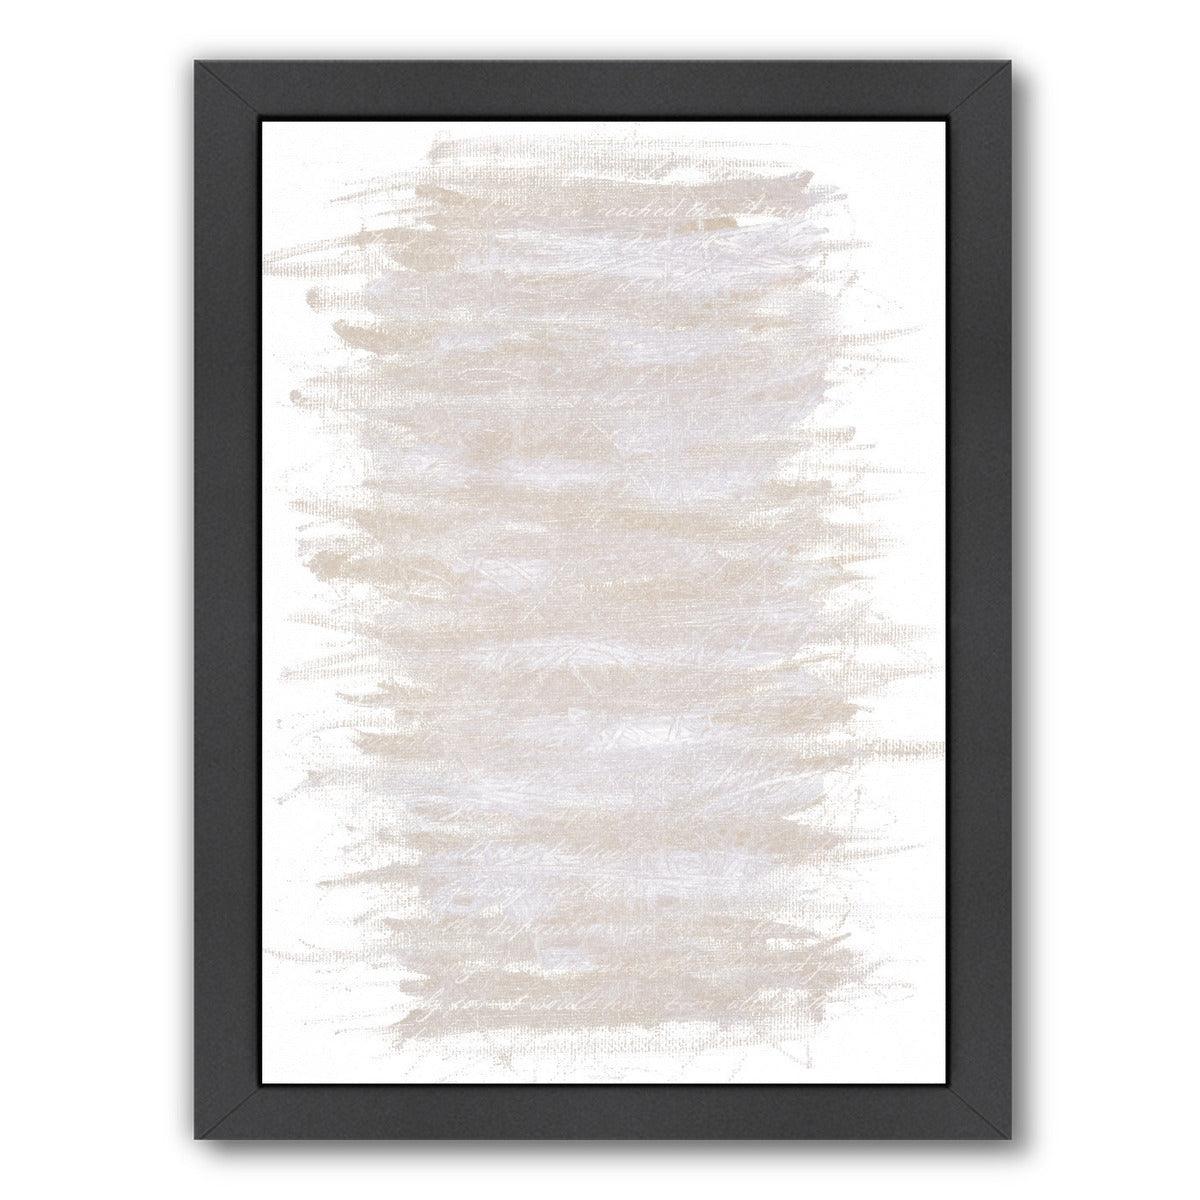 Stack Master Layer By Chaos & Wonder Design - Black Framed Print - Wall Art - Americanflat